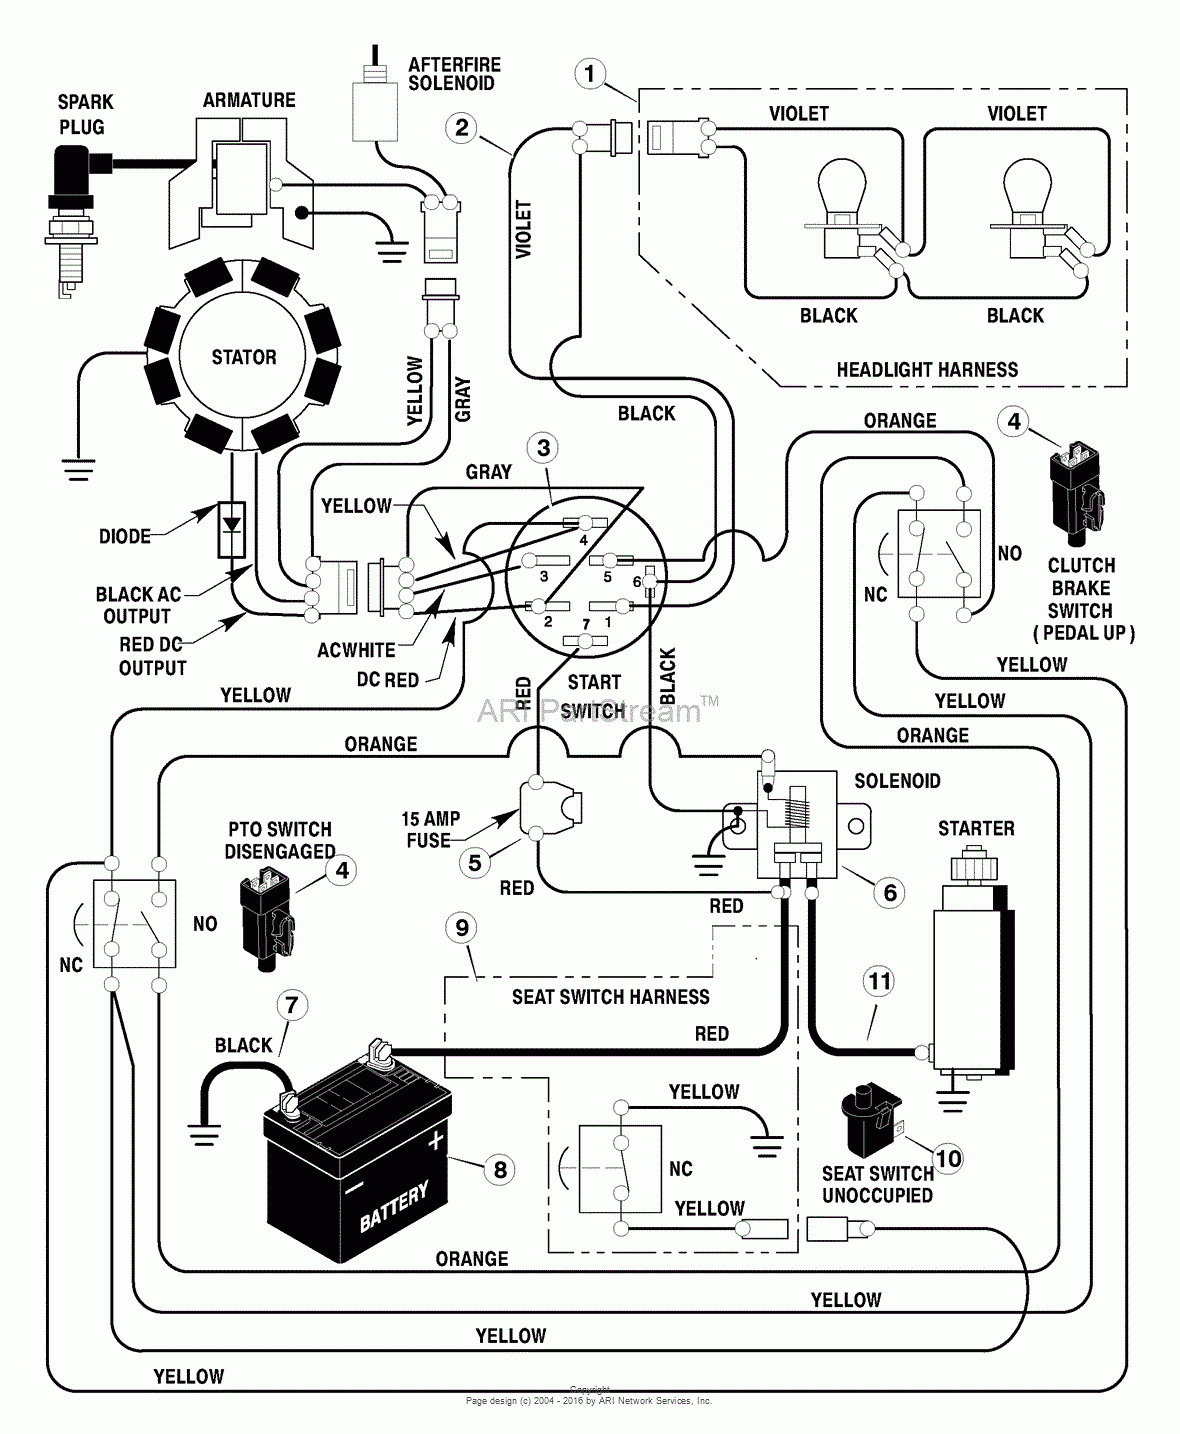 Briggs And Stratton Wiring Diagram 20 Hp Wiring Diagram 16 1 - Briggs And Stratton Wiring Diagram 18 Hp